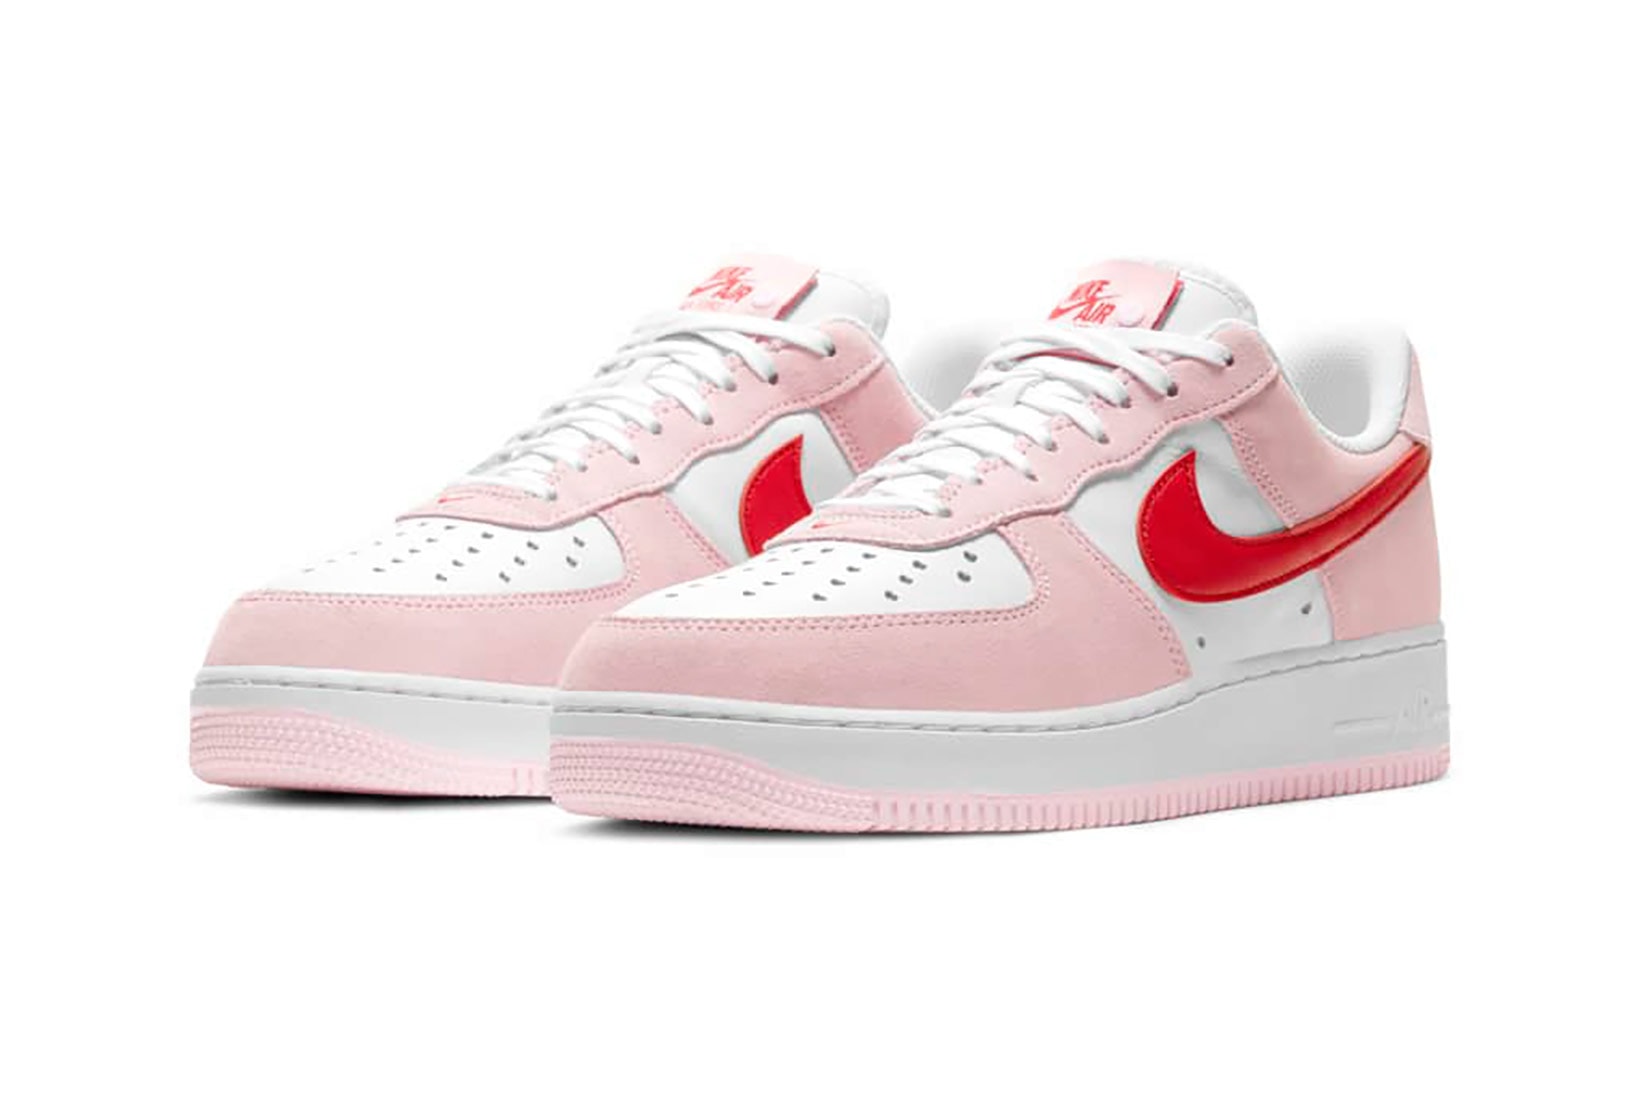 nike air force 1 af1 07 valentines day sneakers pink red white shoes footwear kicks sneakerhead lateral laces